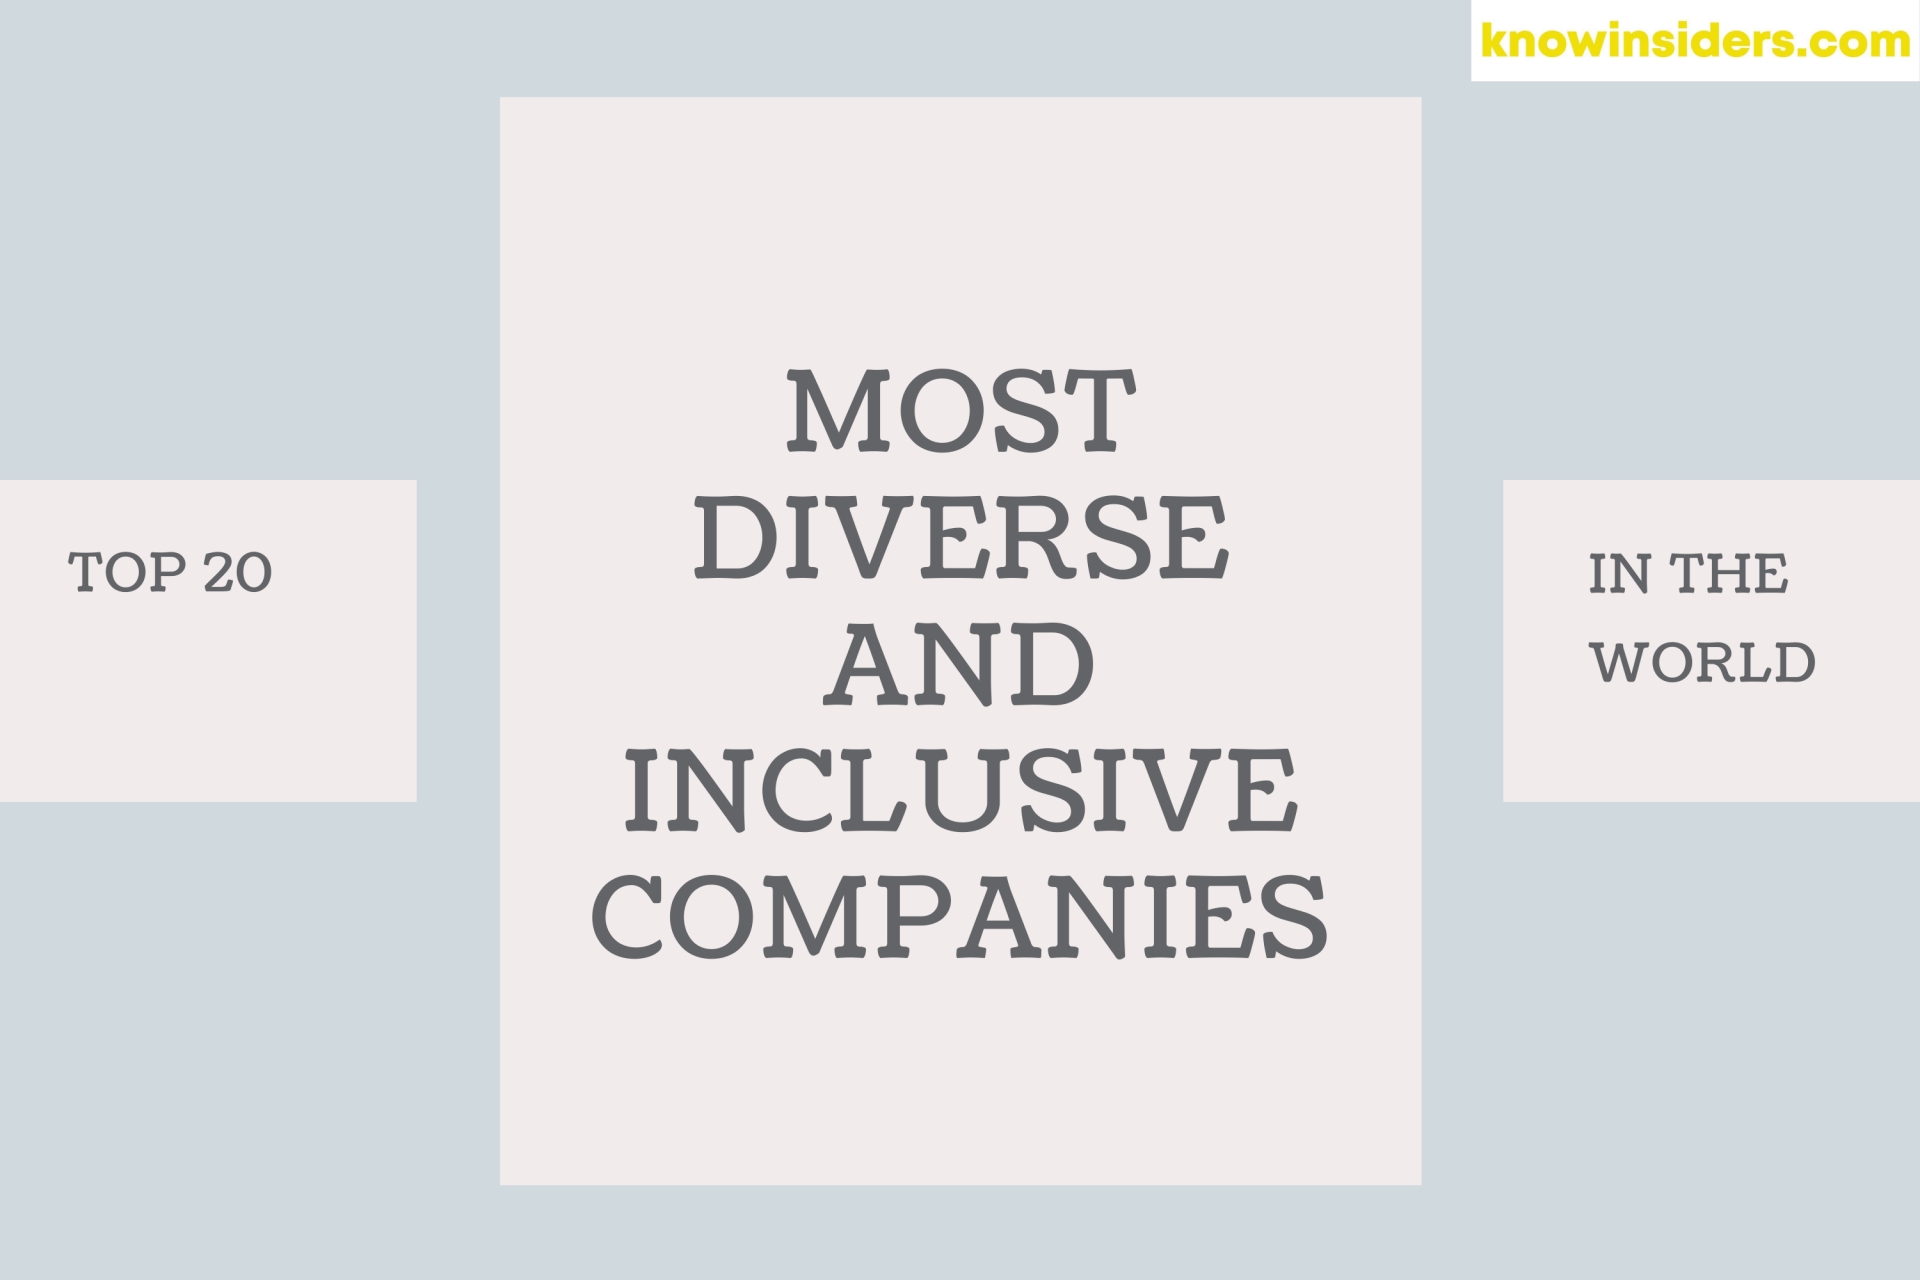 Top 20 Most Diverse and Inclusive Companies In 2021/22